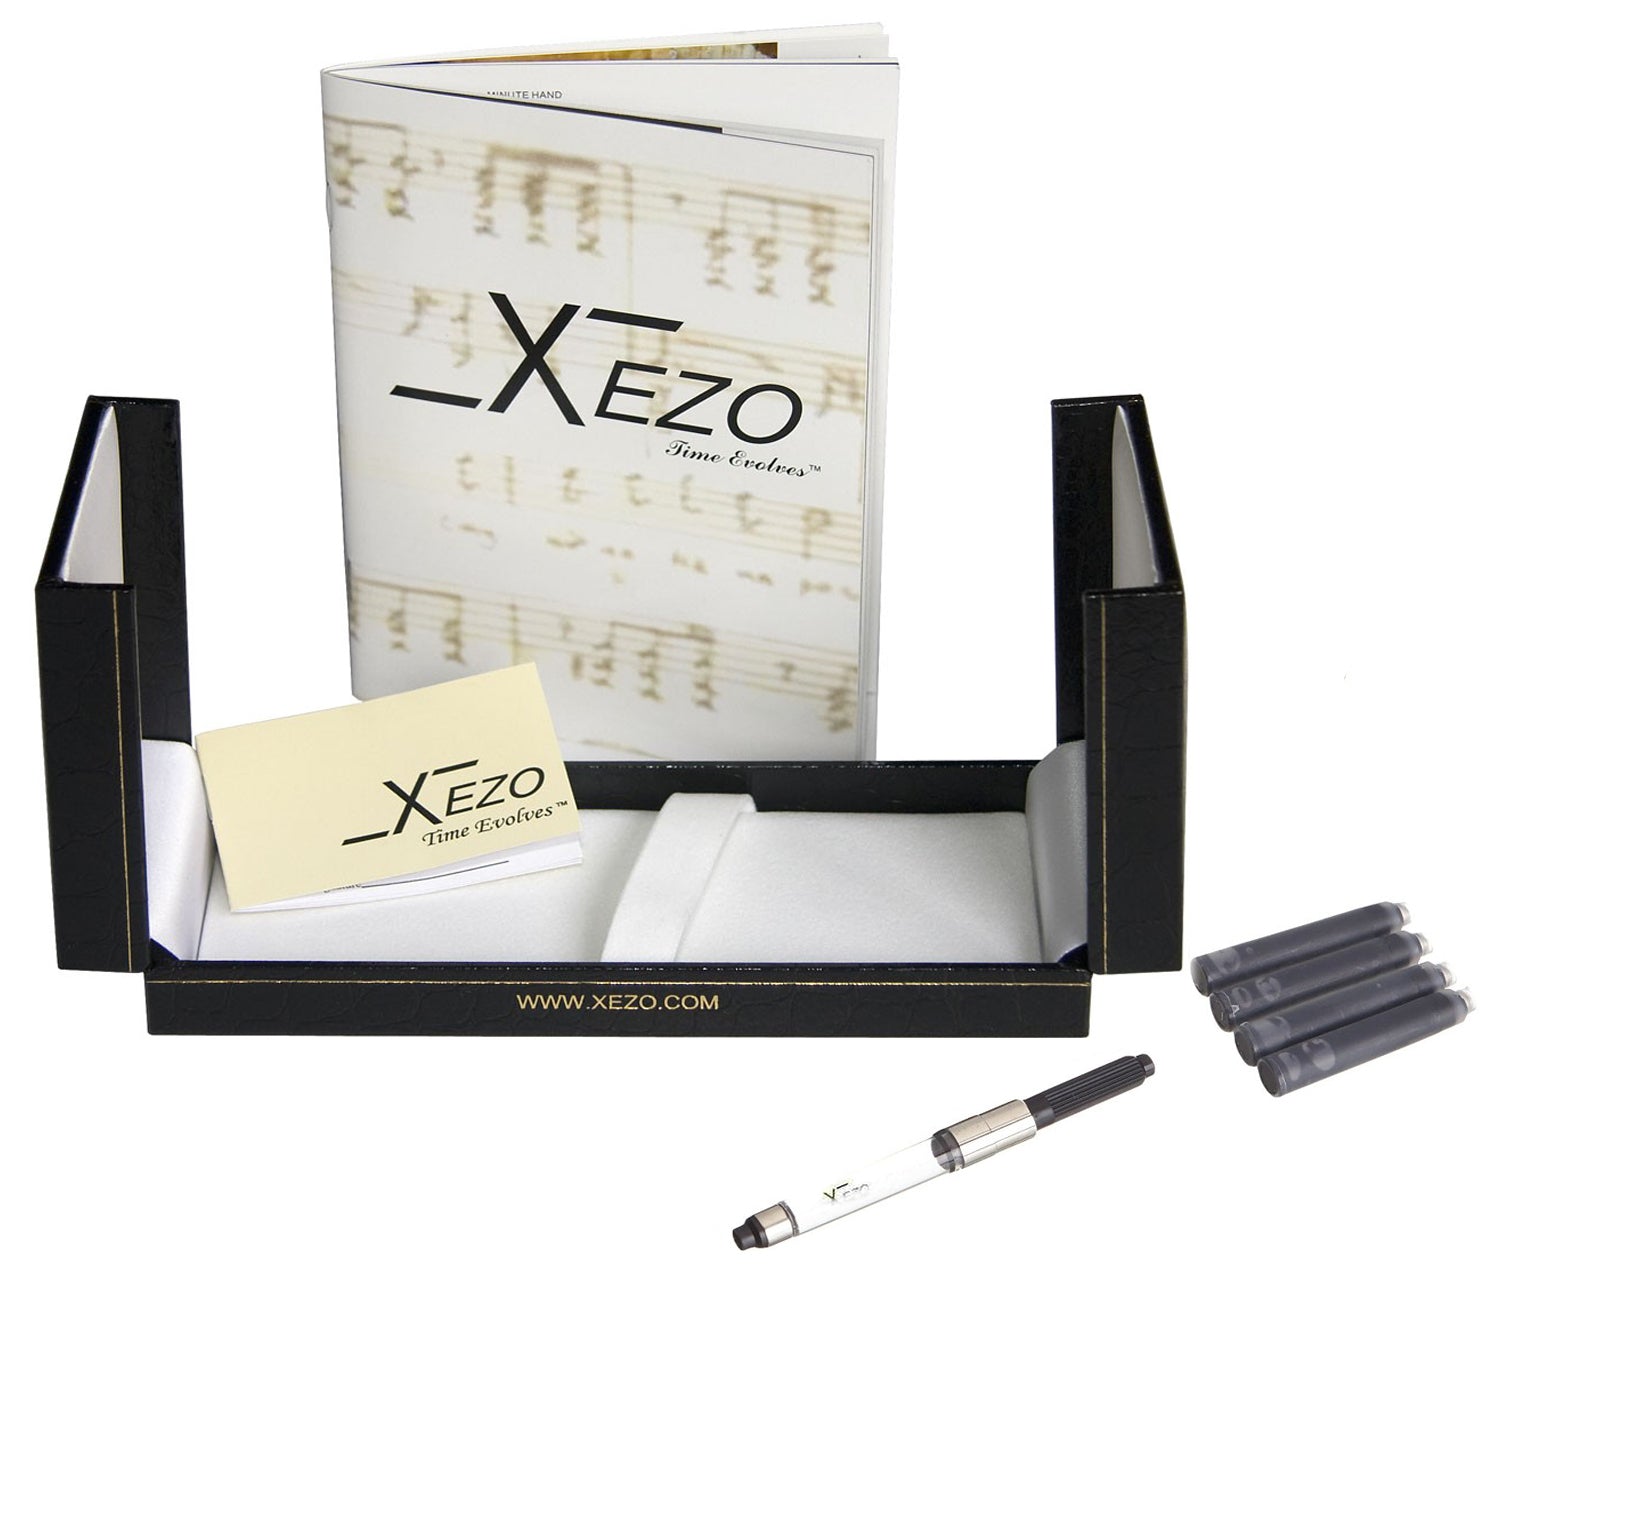 Xezo - Black gift box, certificate, manual, chrome-plated ink converter, and four ink cartridges of the Maestro 925 Sterling Silver F-1 fountain pen